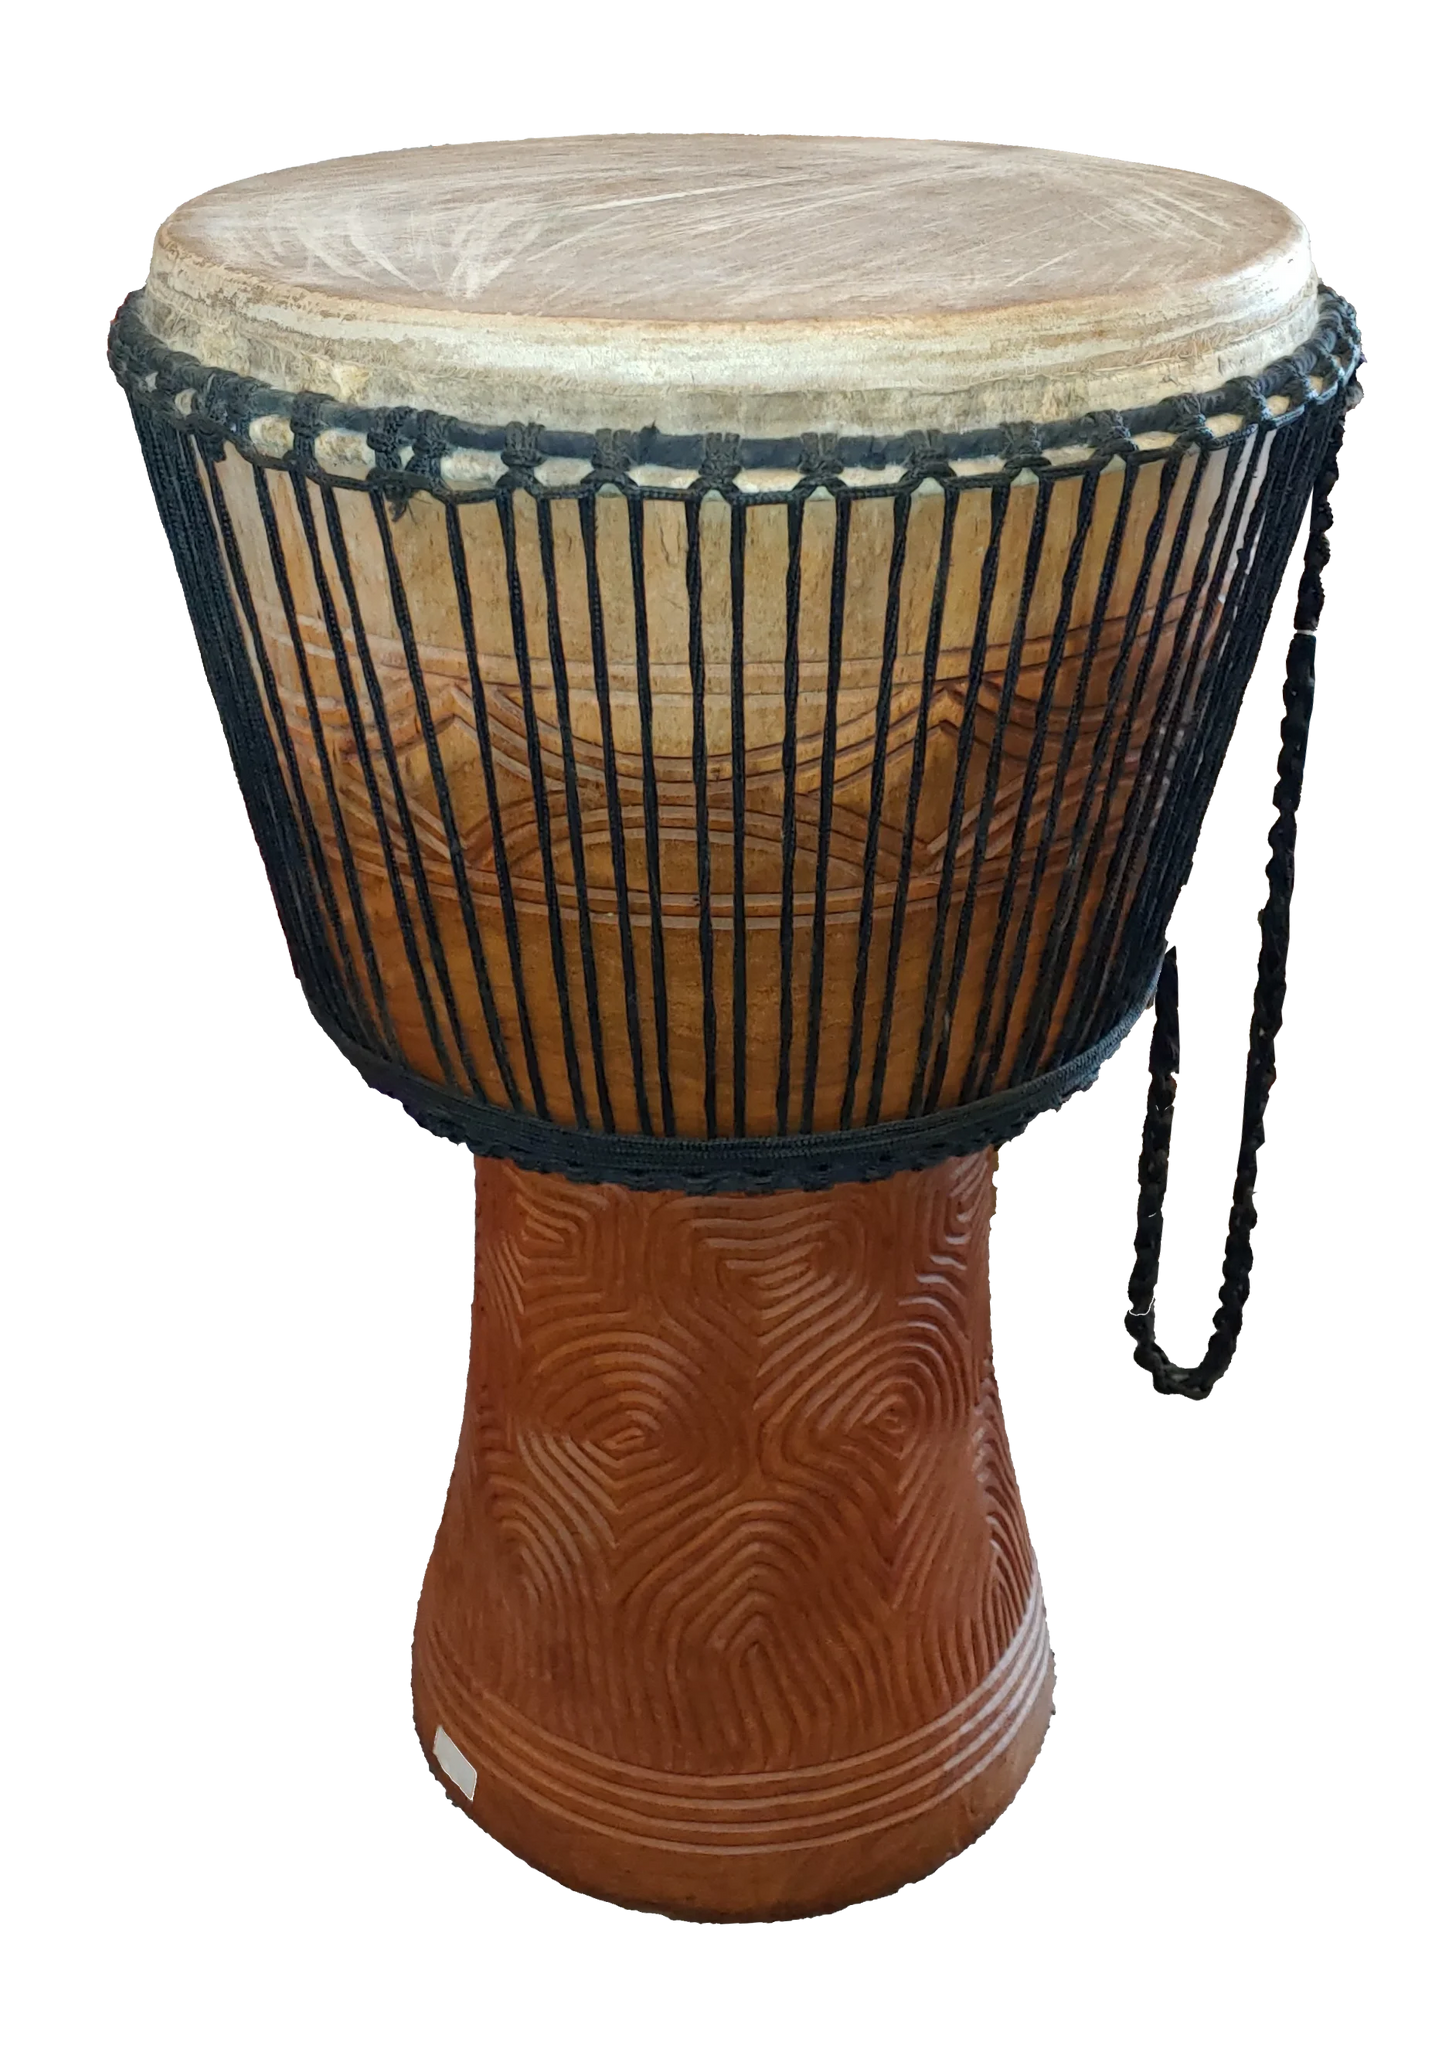 African Djembe Drums